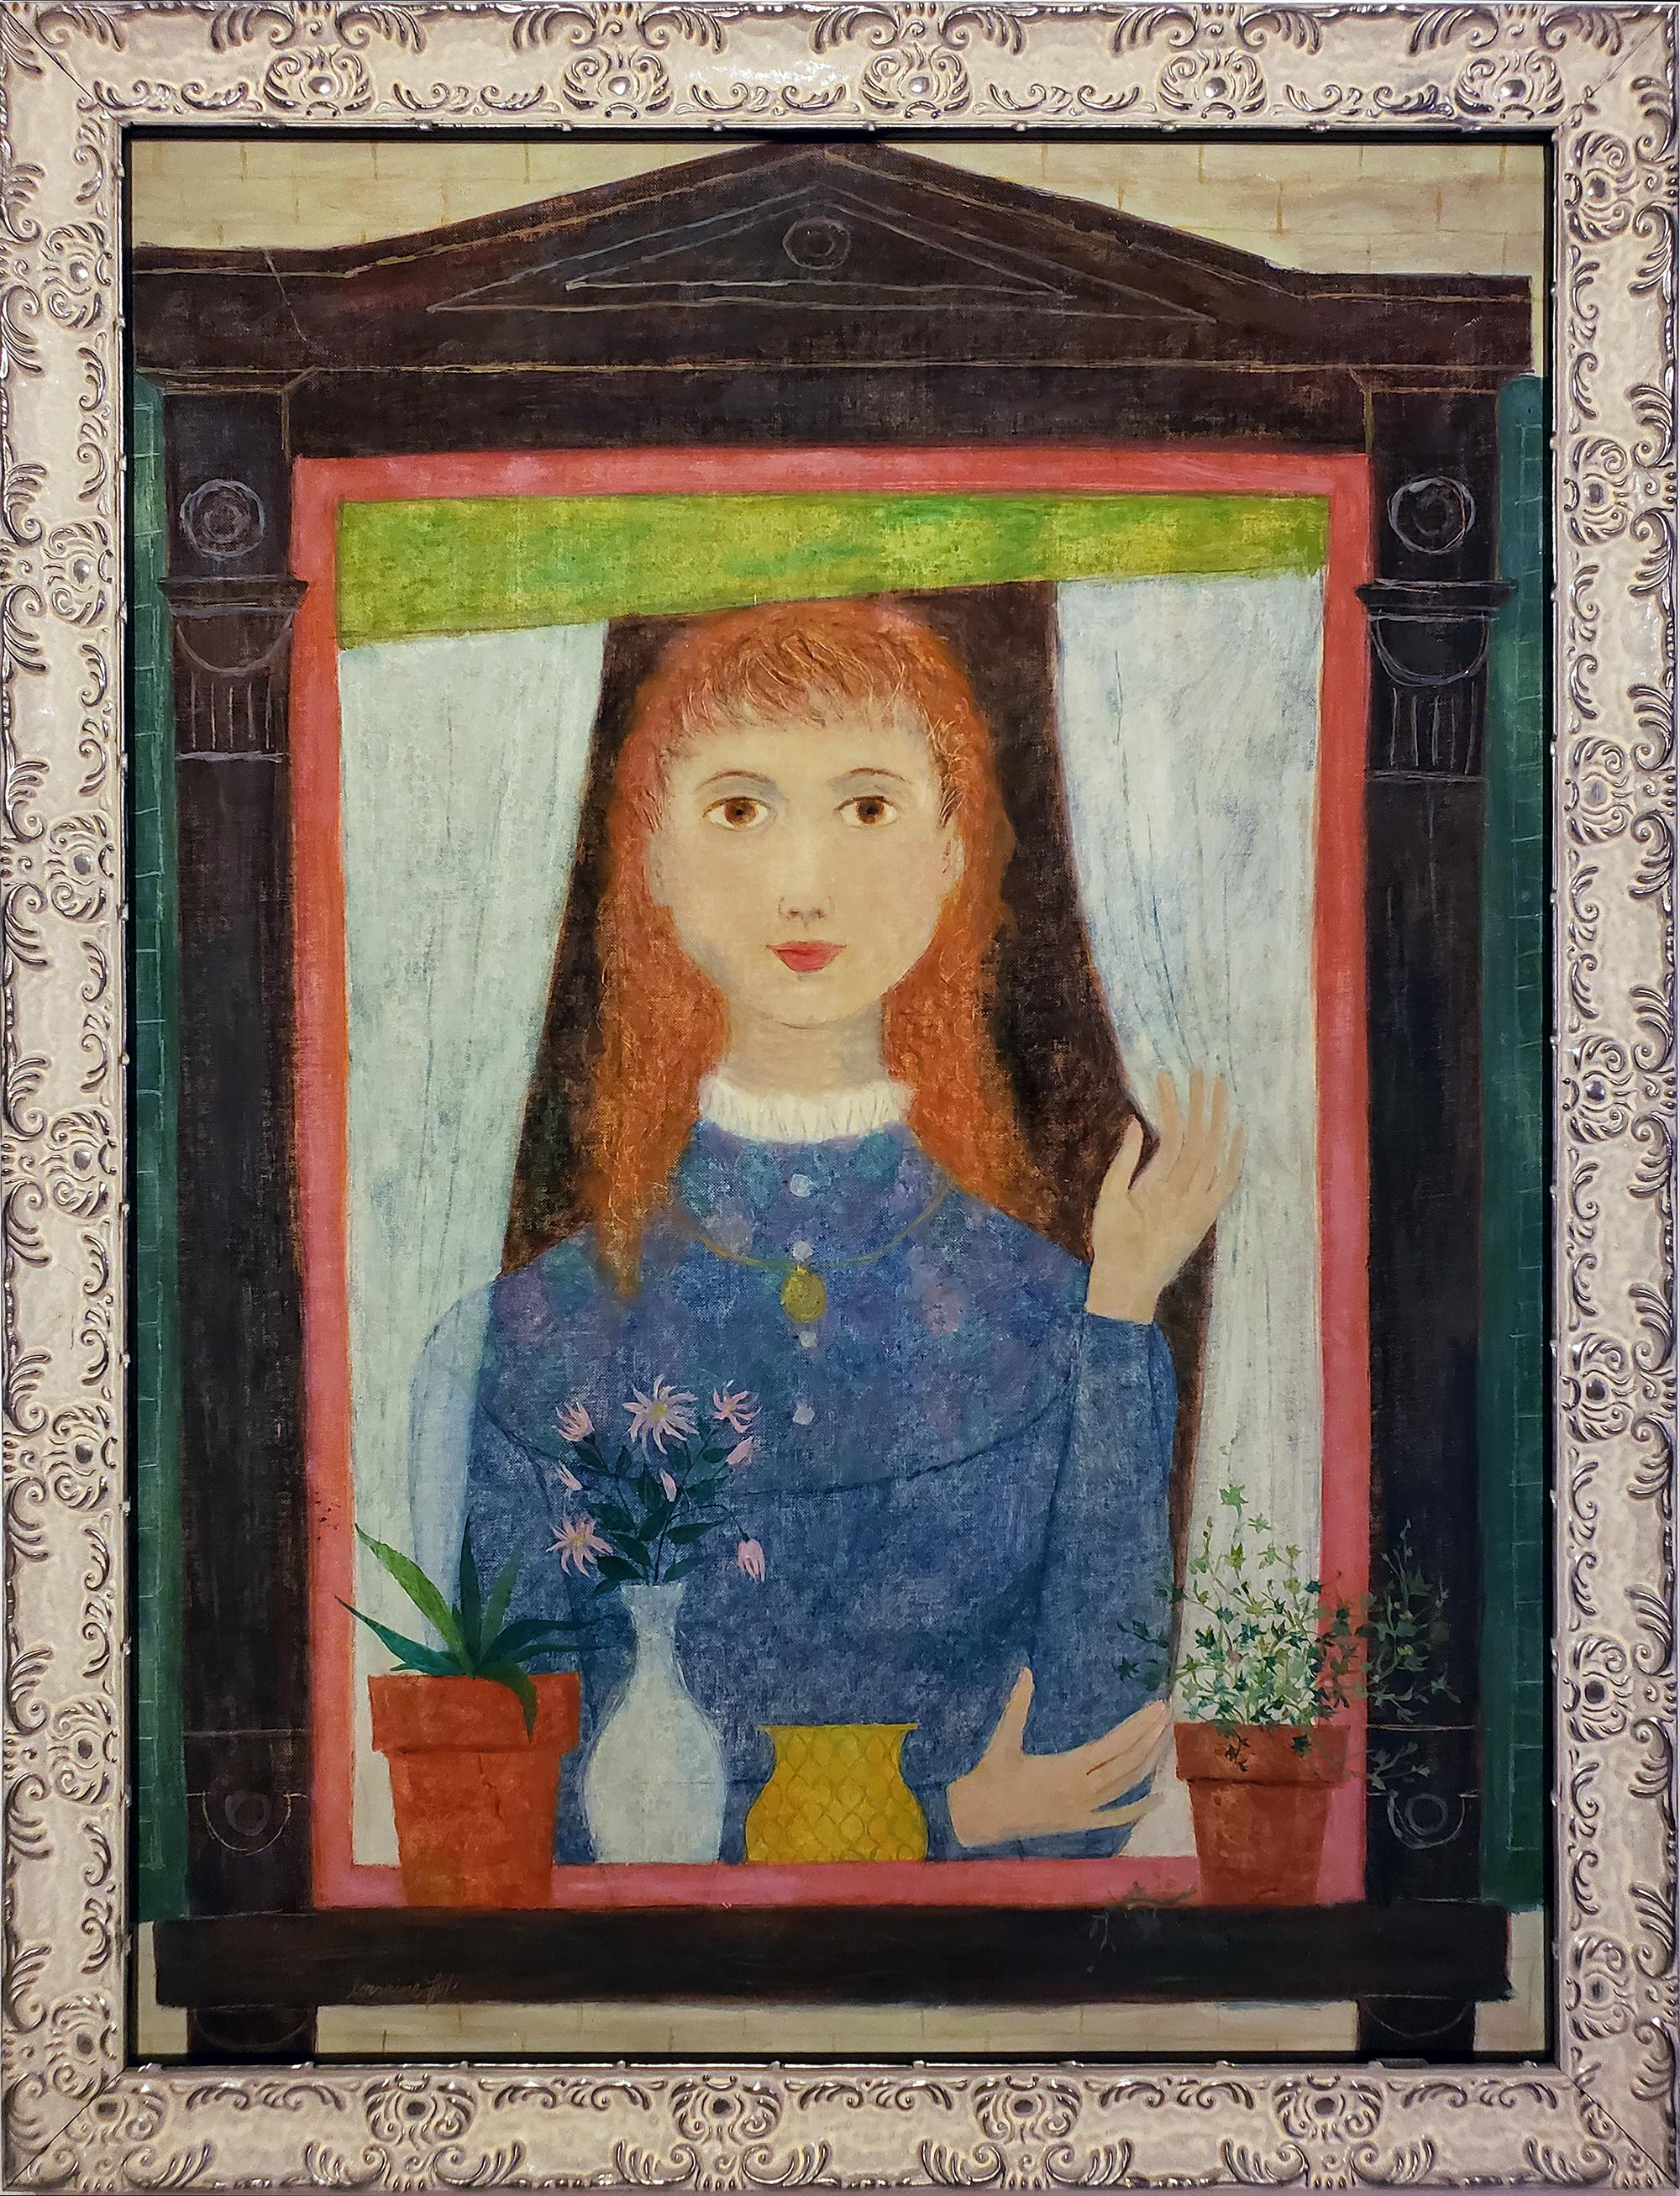 Lorraine Fox - Redhead Girl in Window with Flower Pots, For Sale at 1stDibs